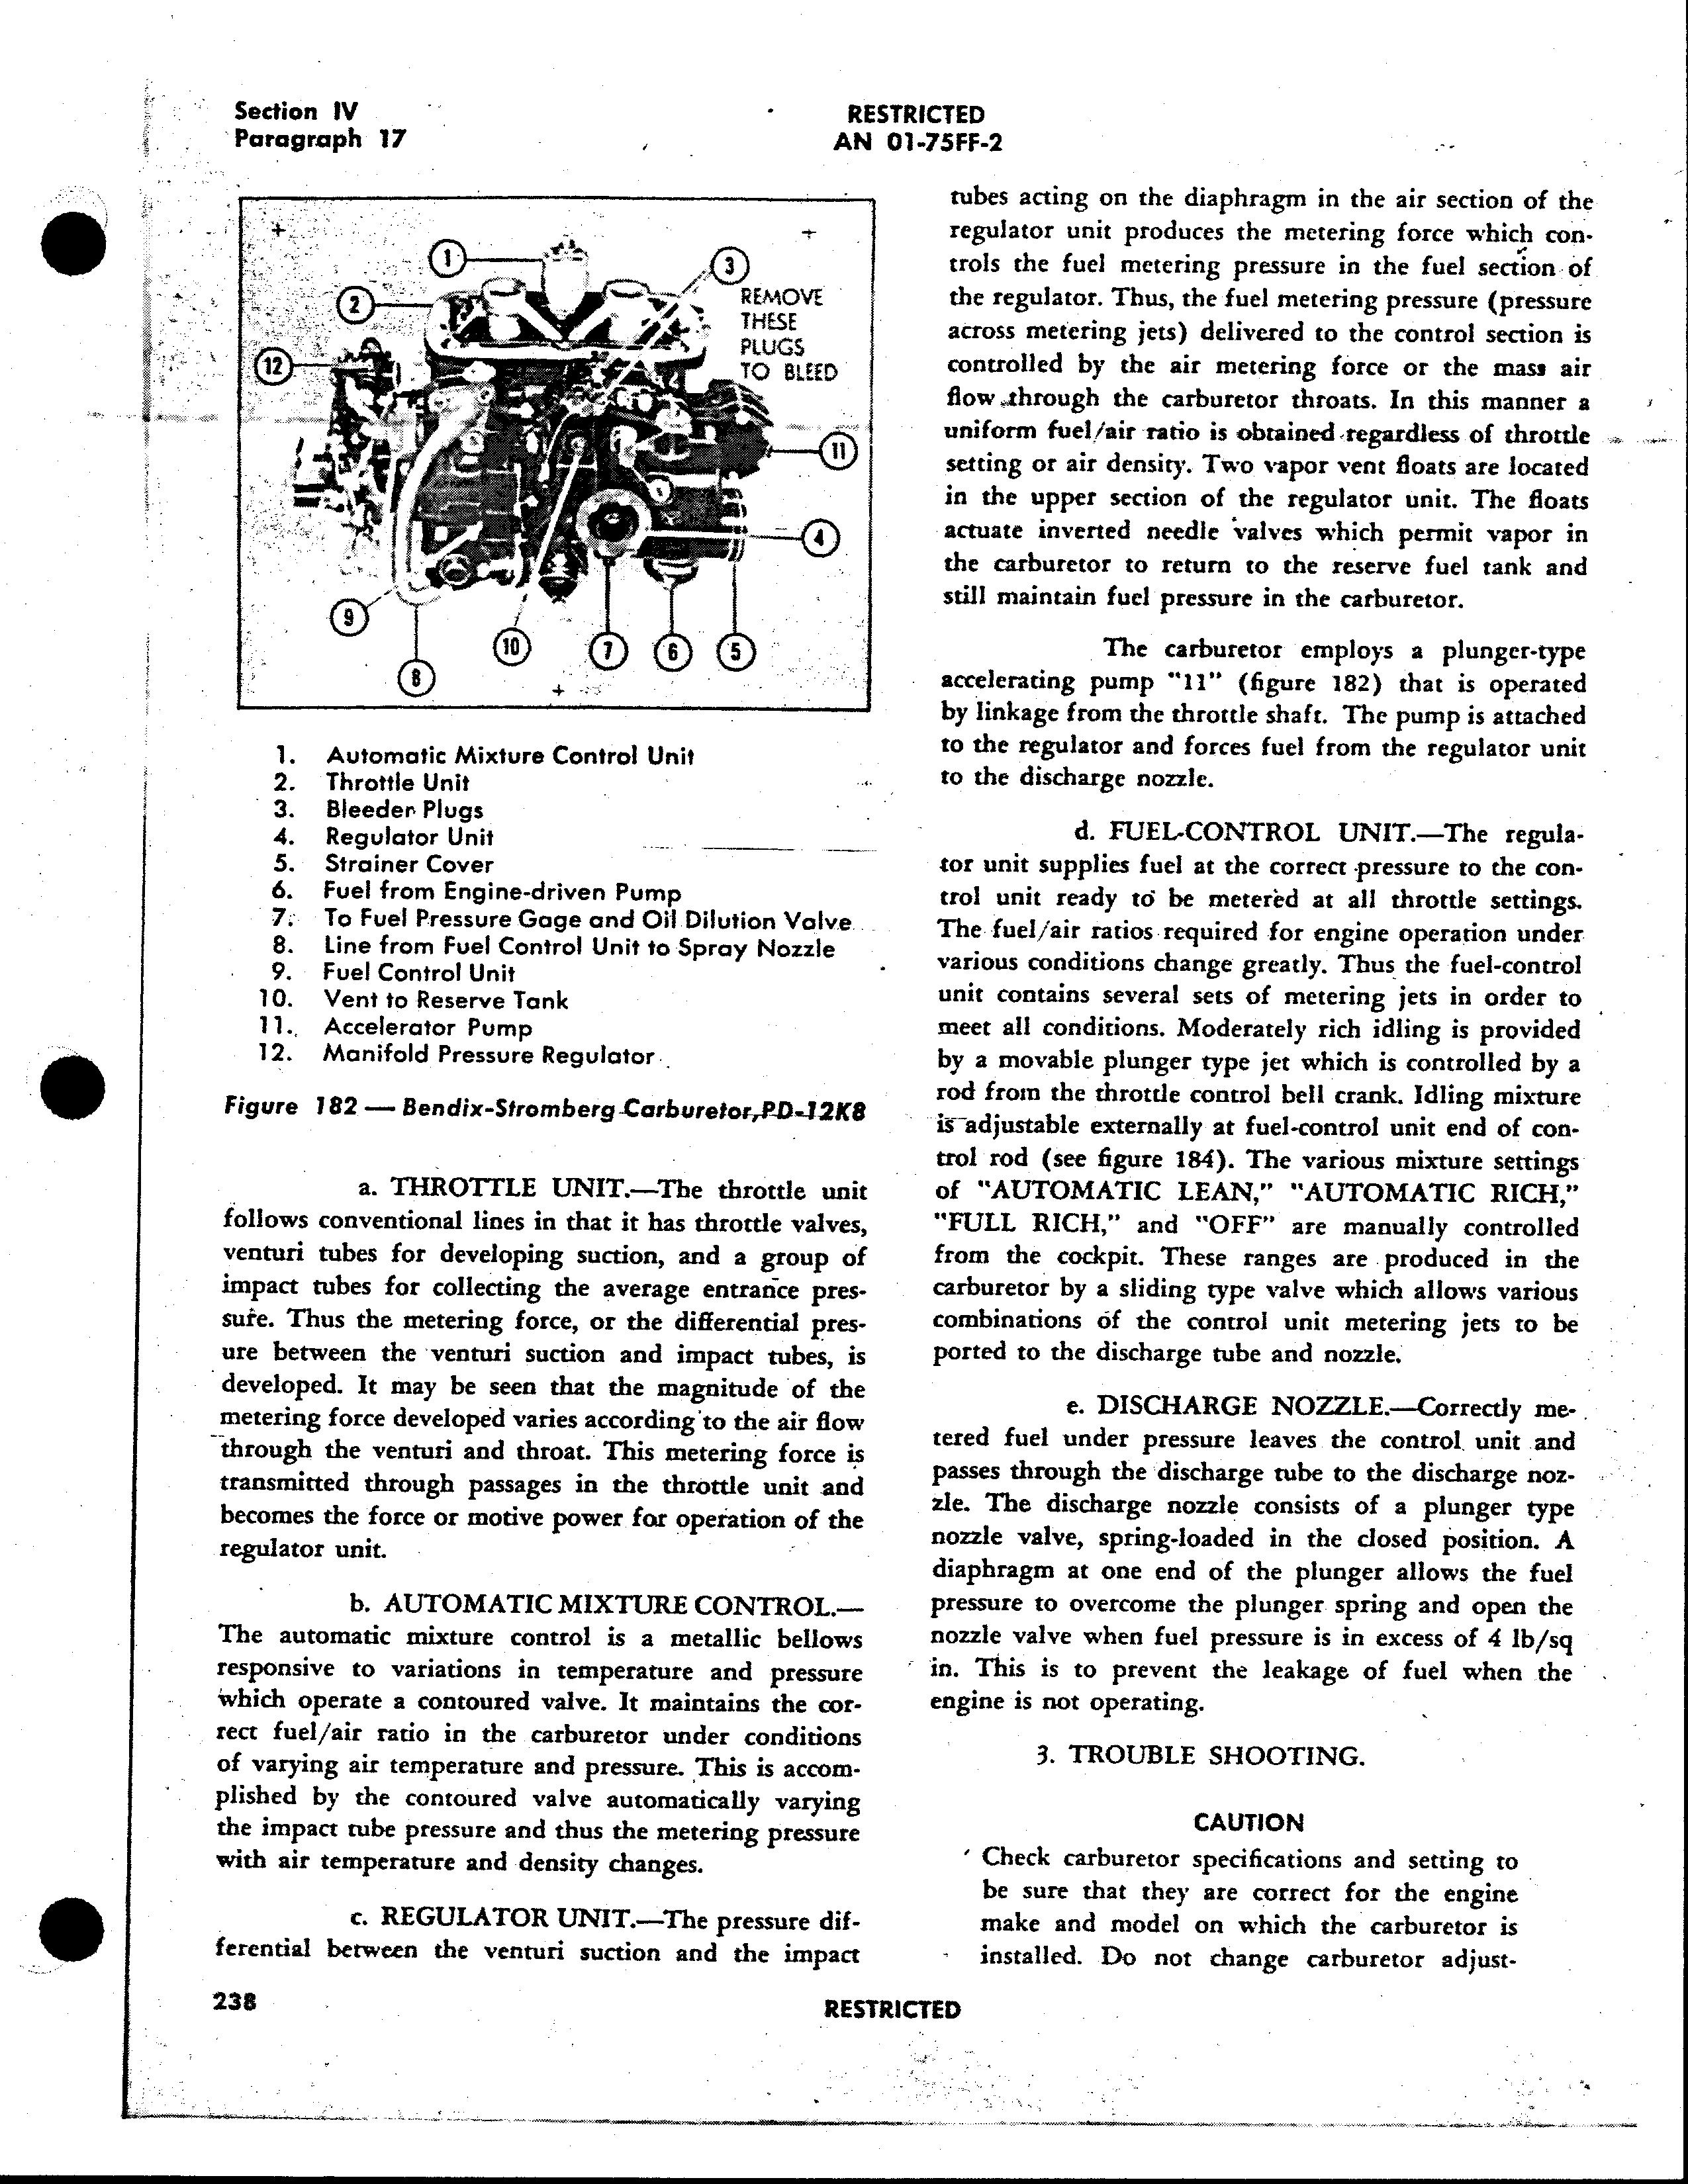 Sample page 266 from AirCorps Library document: Erection & Maintenance Manual - P-38